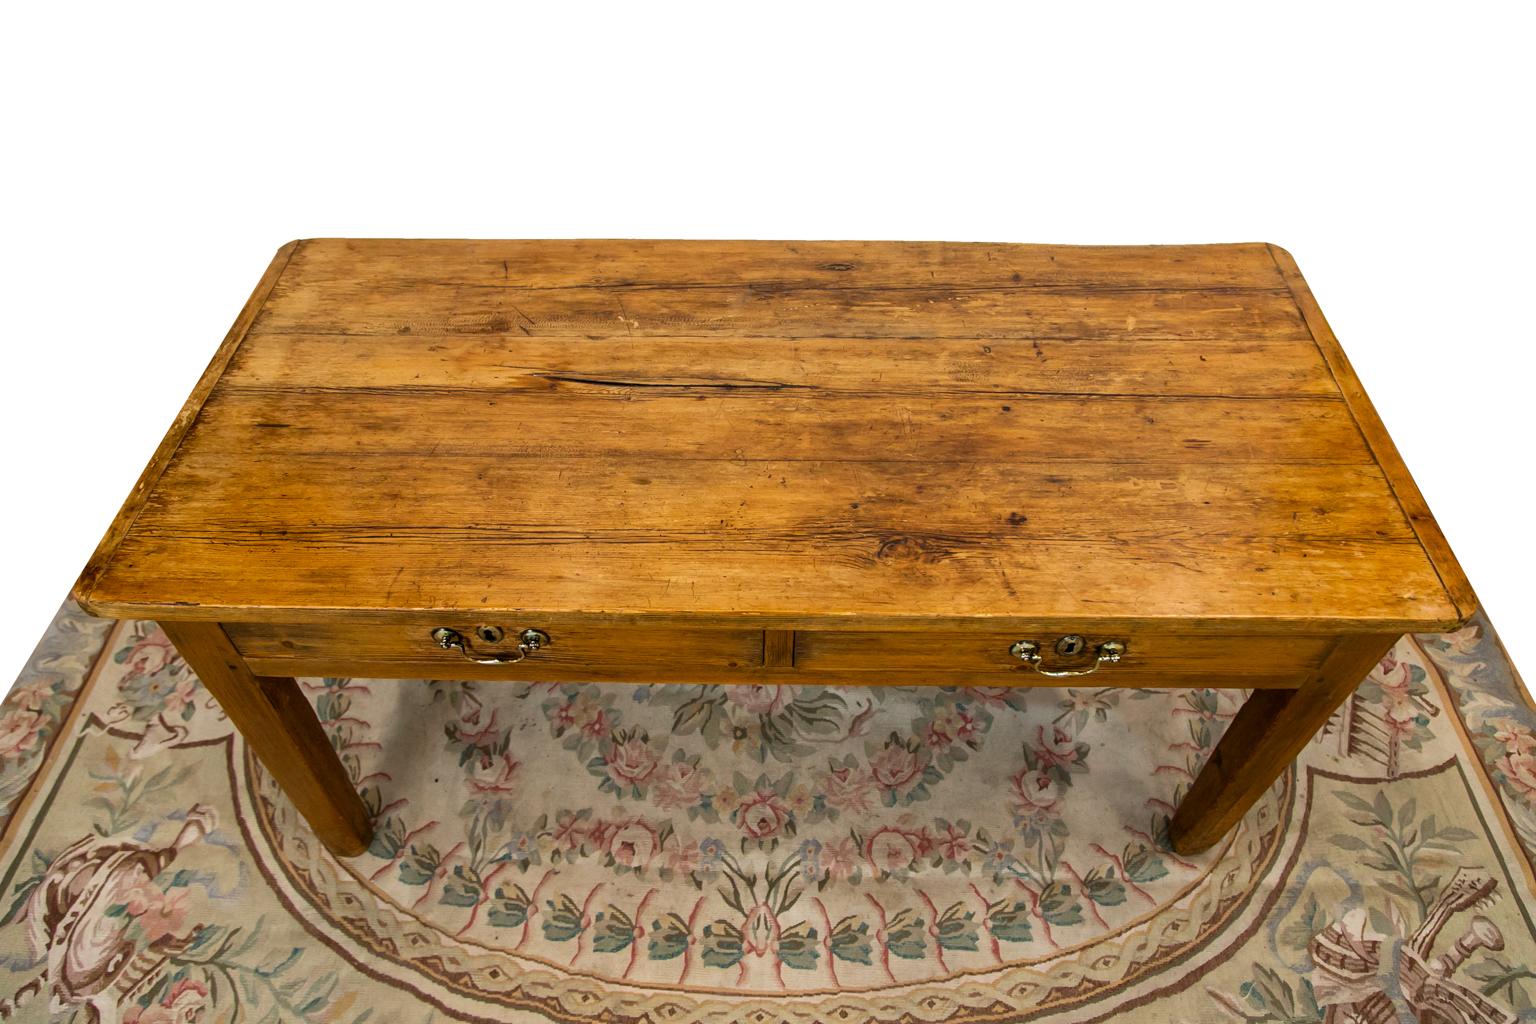 The top of this table has weathered patina with shrinkage cracks in the cavities. There is exposed peg construction throughout. The top has 1 1/4 inch breadboard ends, each with three exposed mortise and tenon joints. The hardware is later.